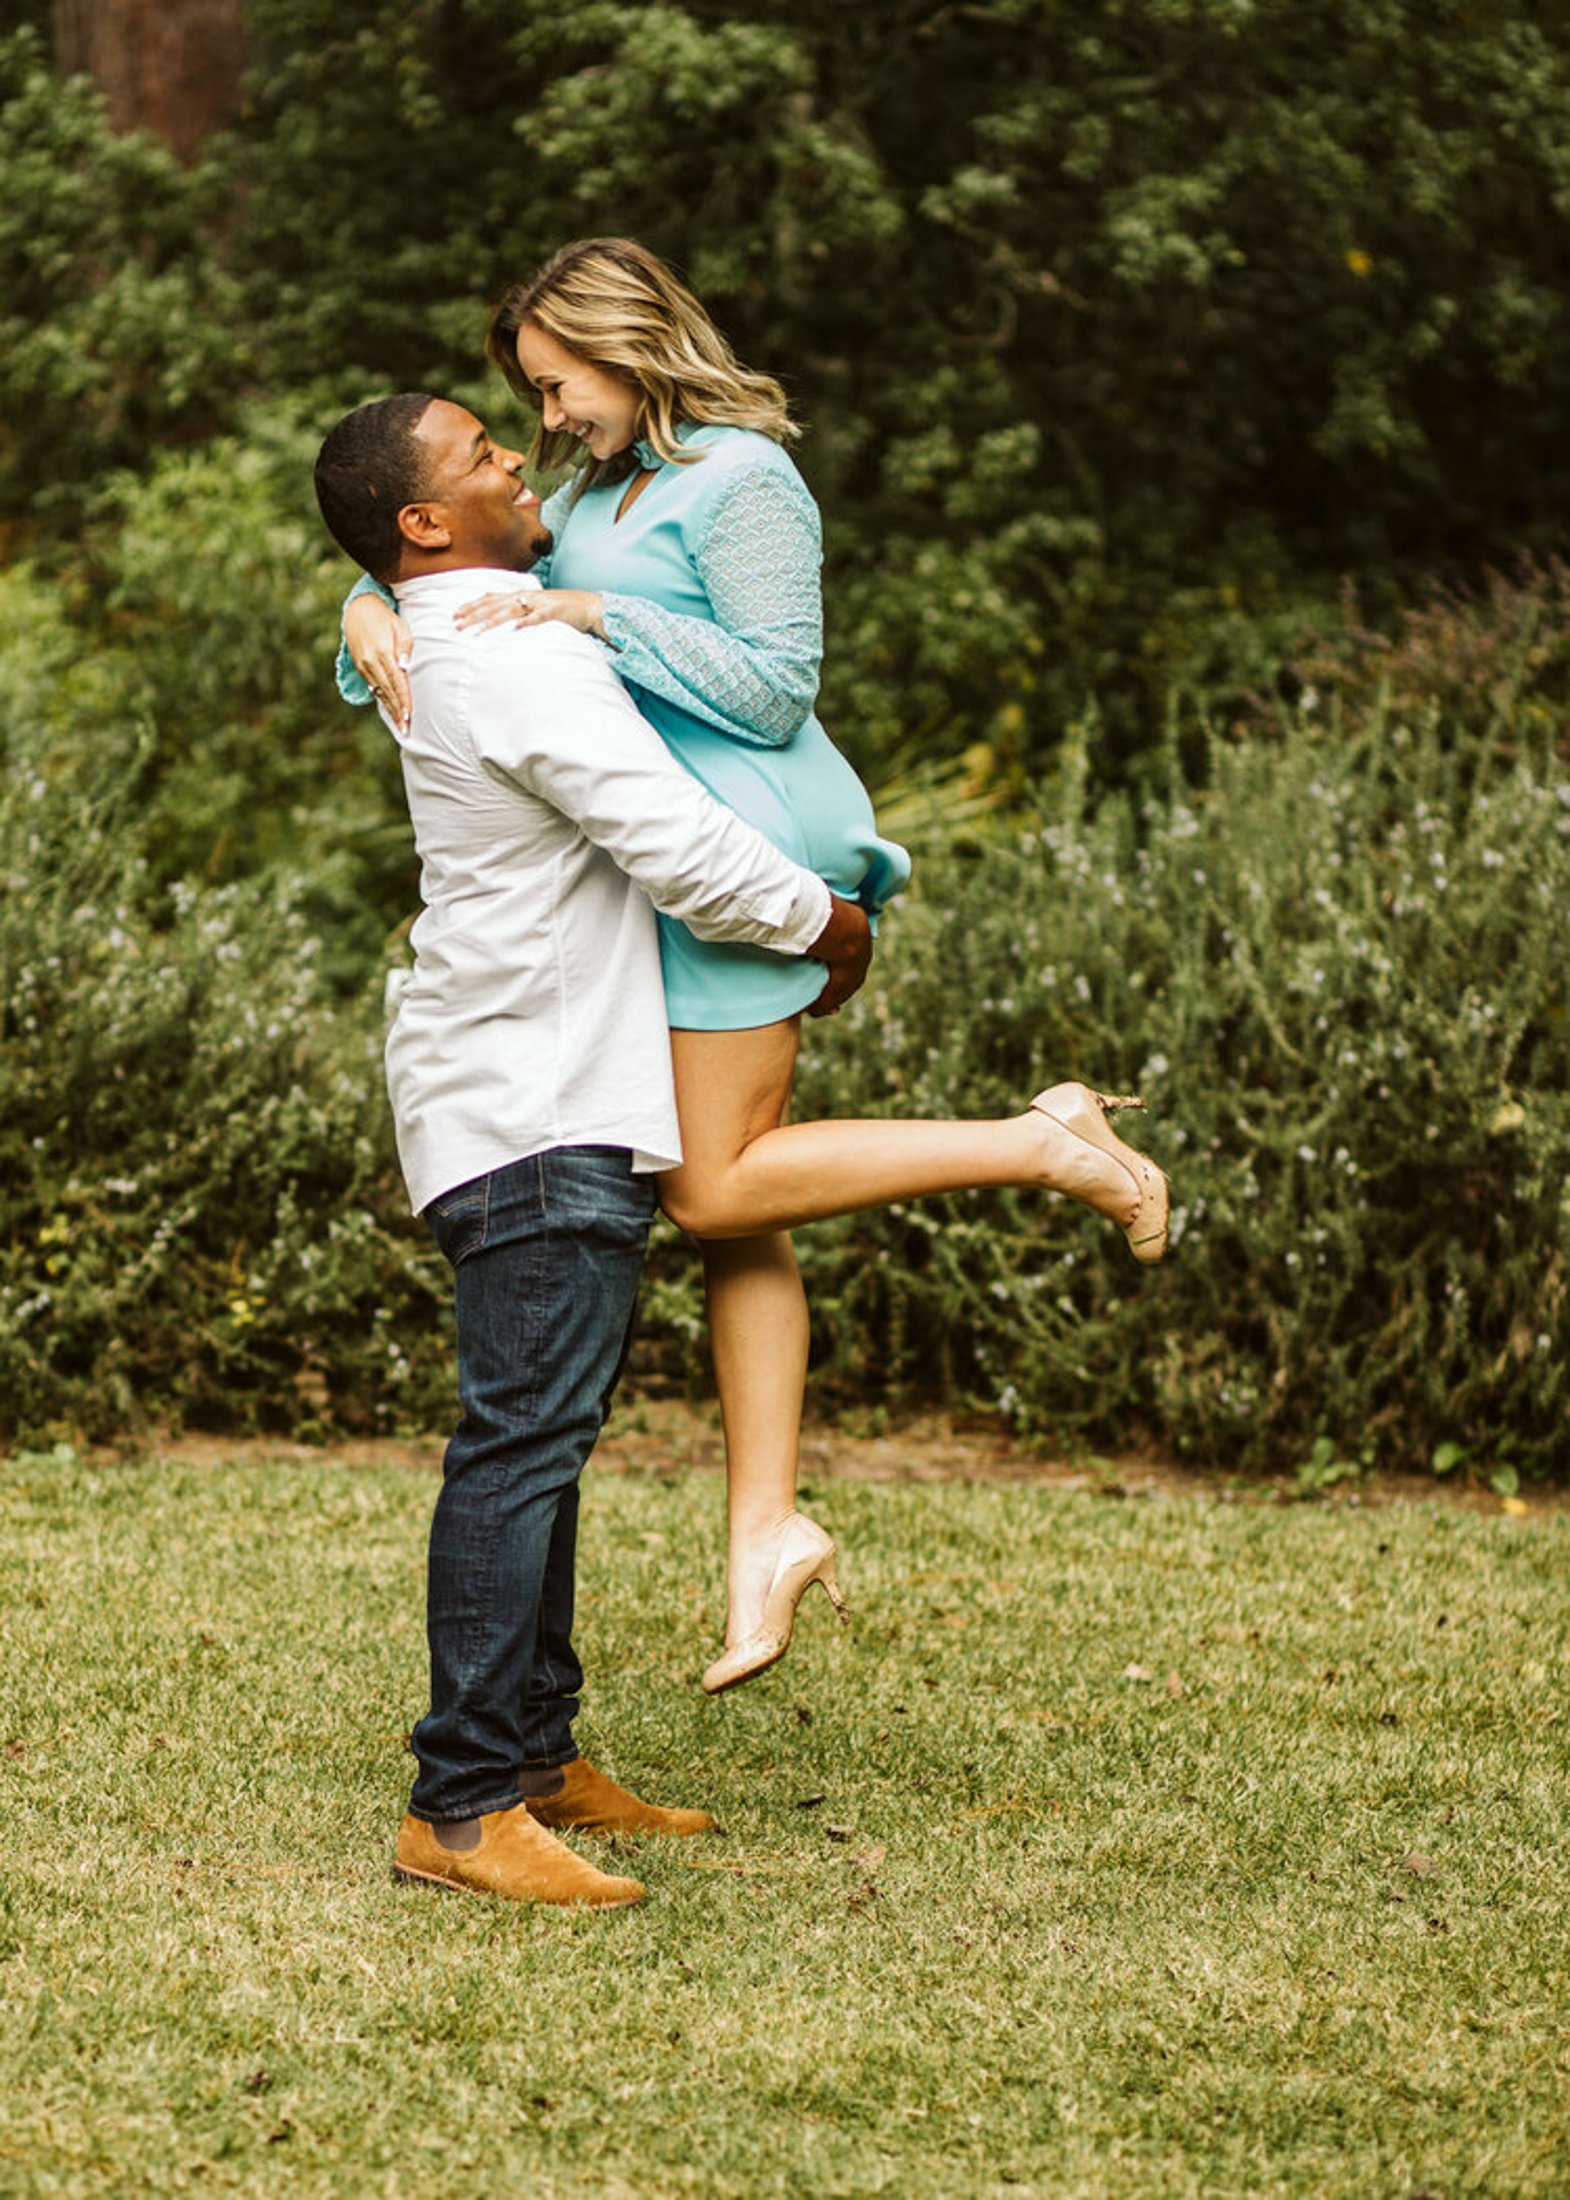 5 of the best places to take engagment photos in Greenville, SC | SC Botanical Gardens-6.jpg